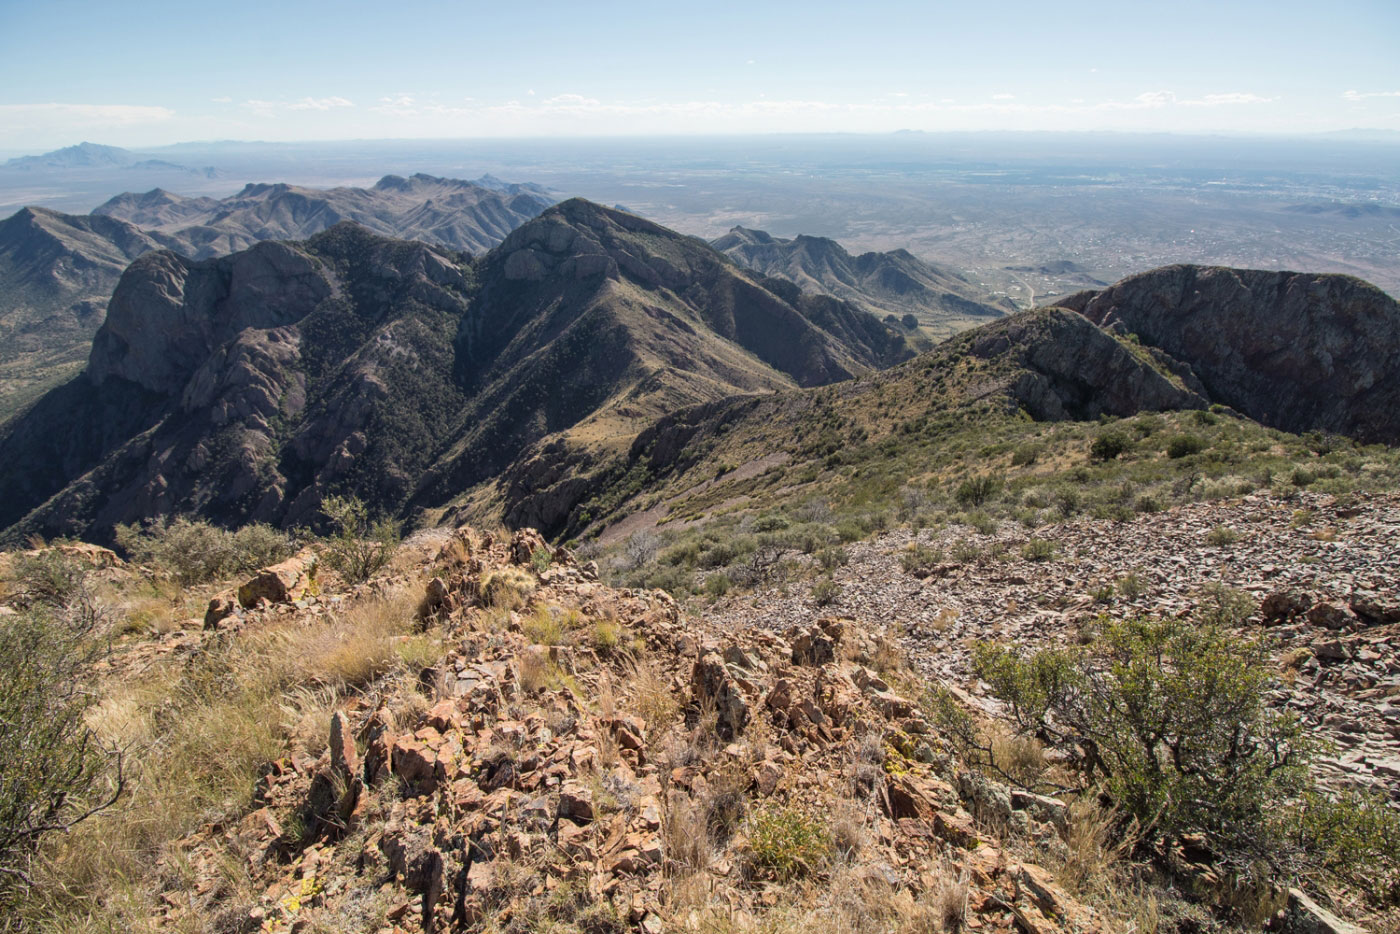 Hike Baldy Peak via Bar Canyon in Organ Mountains-Desert Peaks National Monument, New Mexico - Stav is Lost